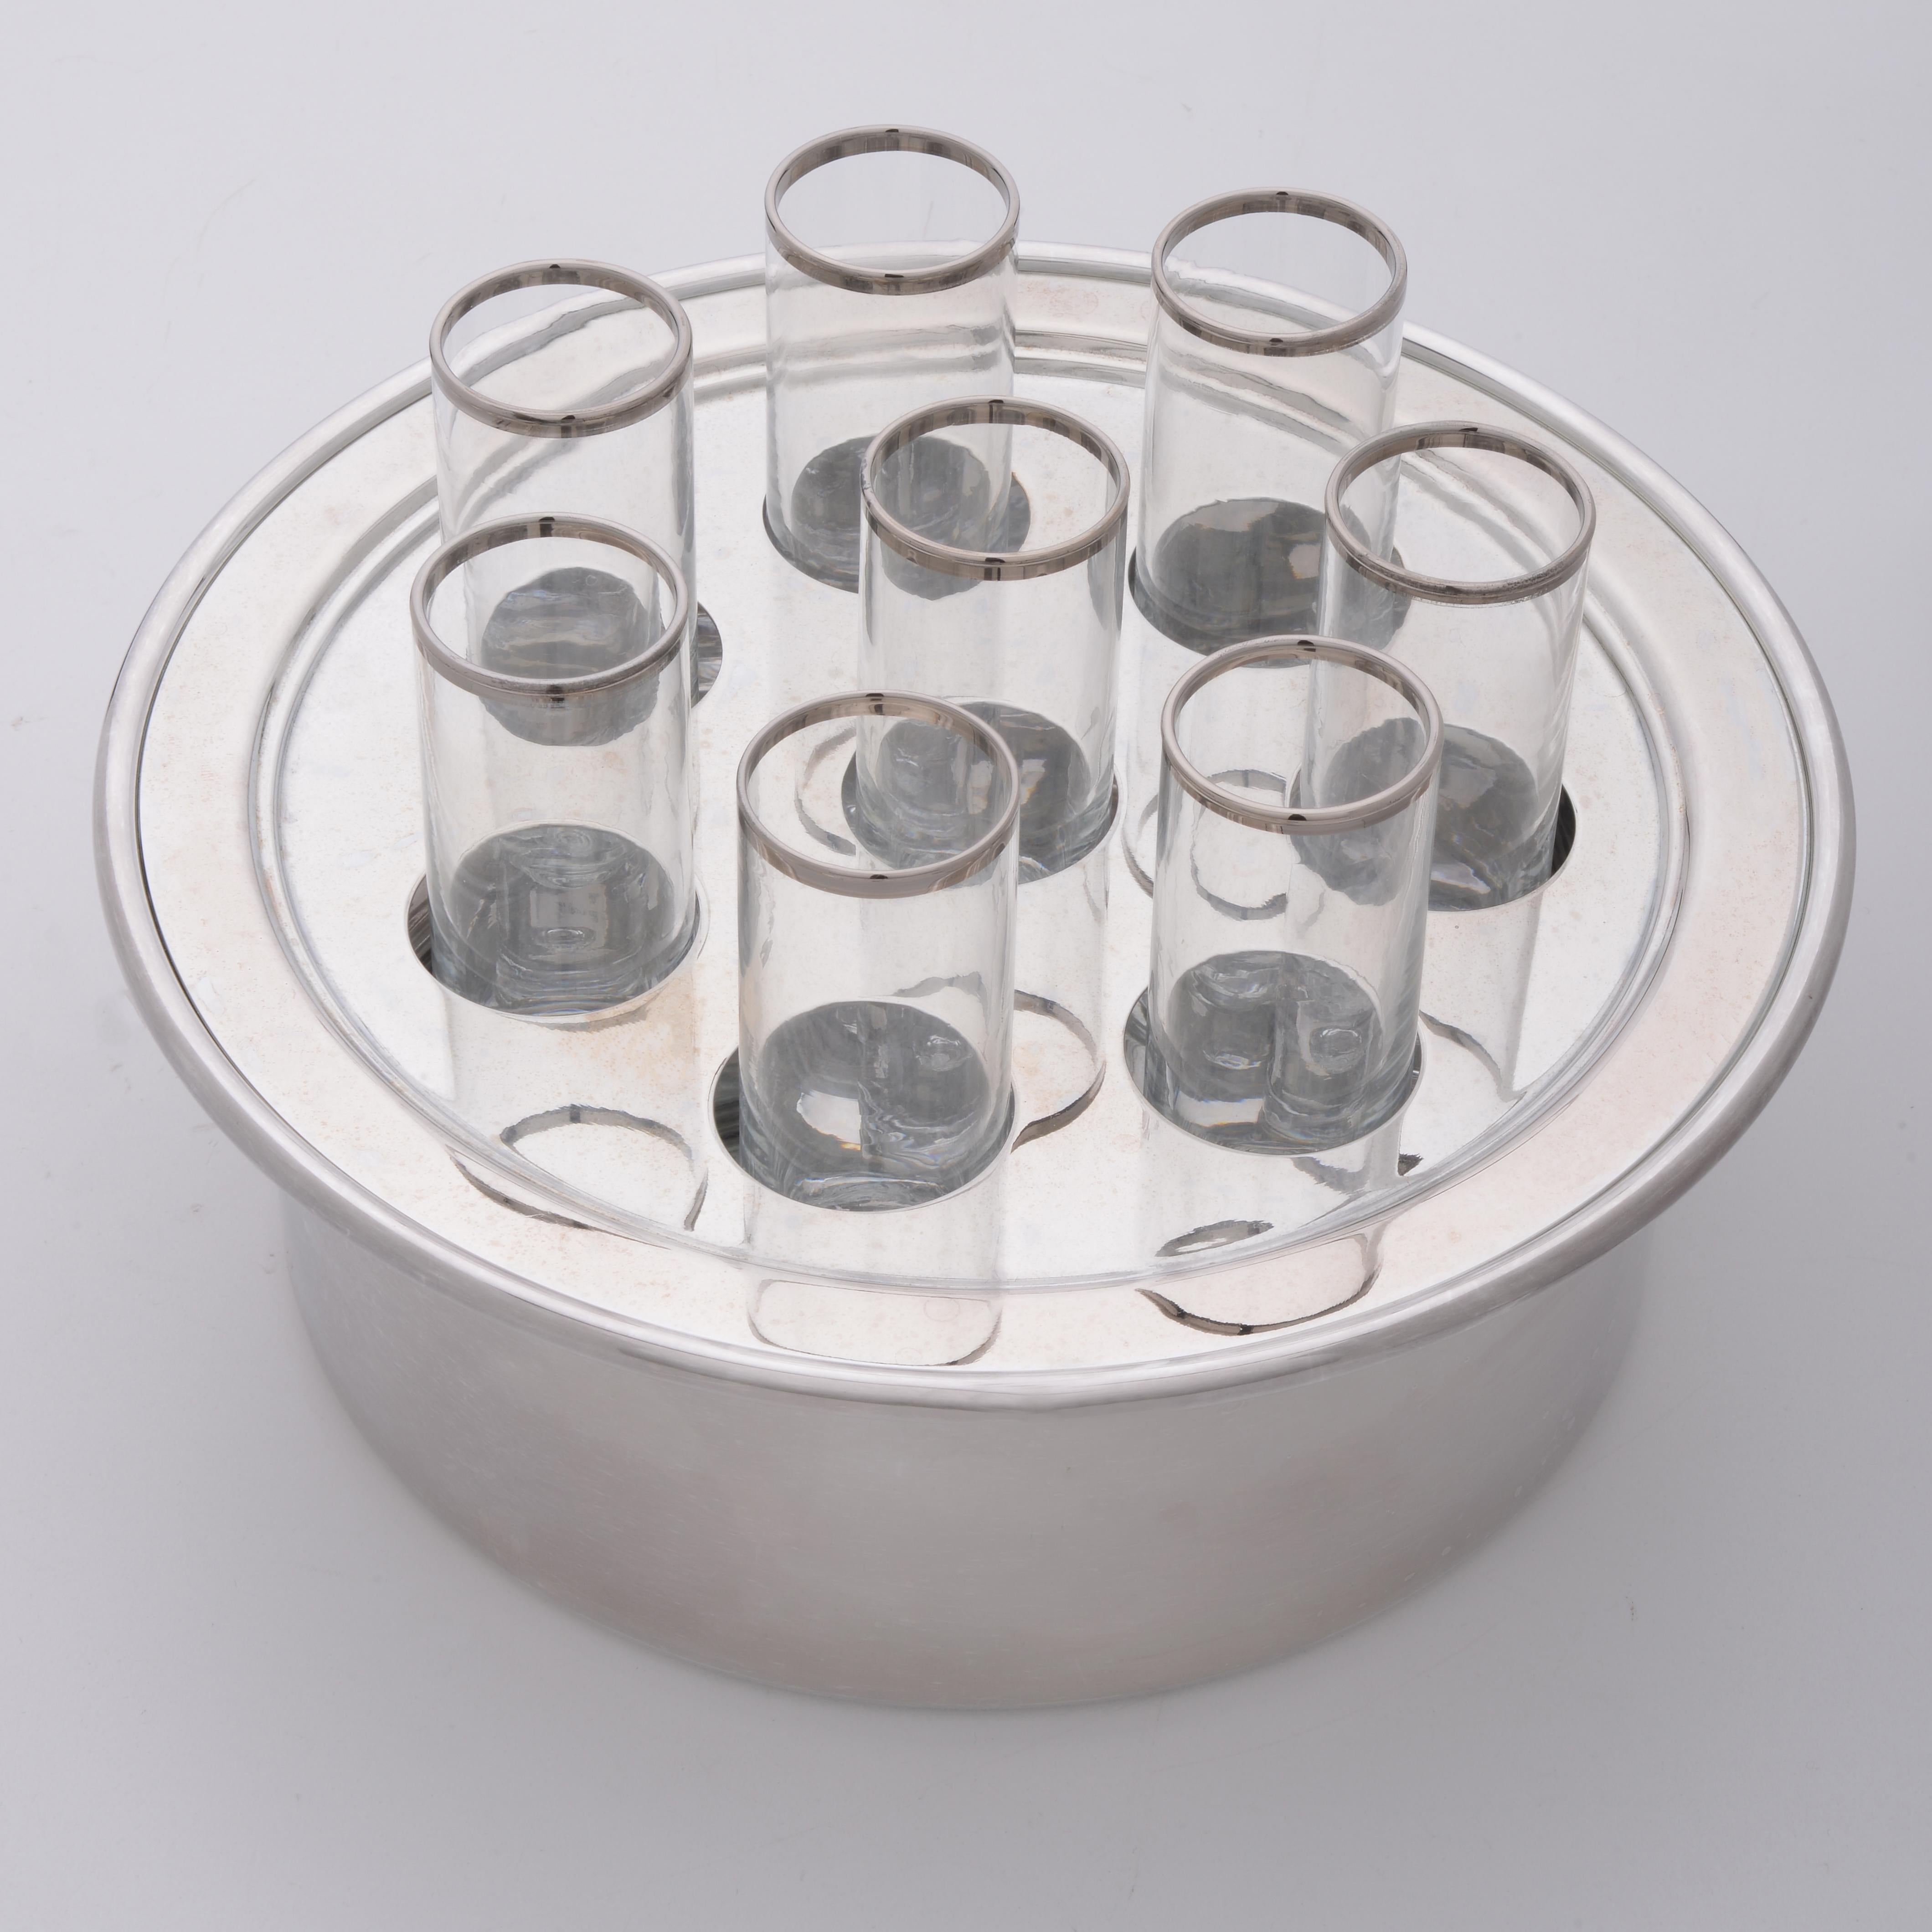 Elegant Italian silver plated ice container bowl with 8 glasses with silver rim. By a famous Italian silversmith: 
 R.RICCI Argentieri in Italy - Marengo- 
Never used. Good price for closing activities !!
 